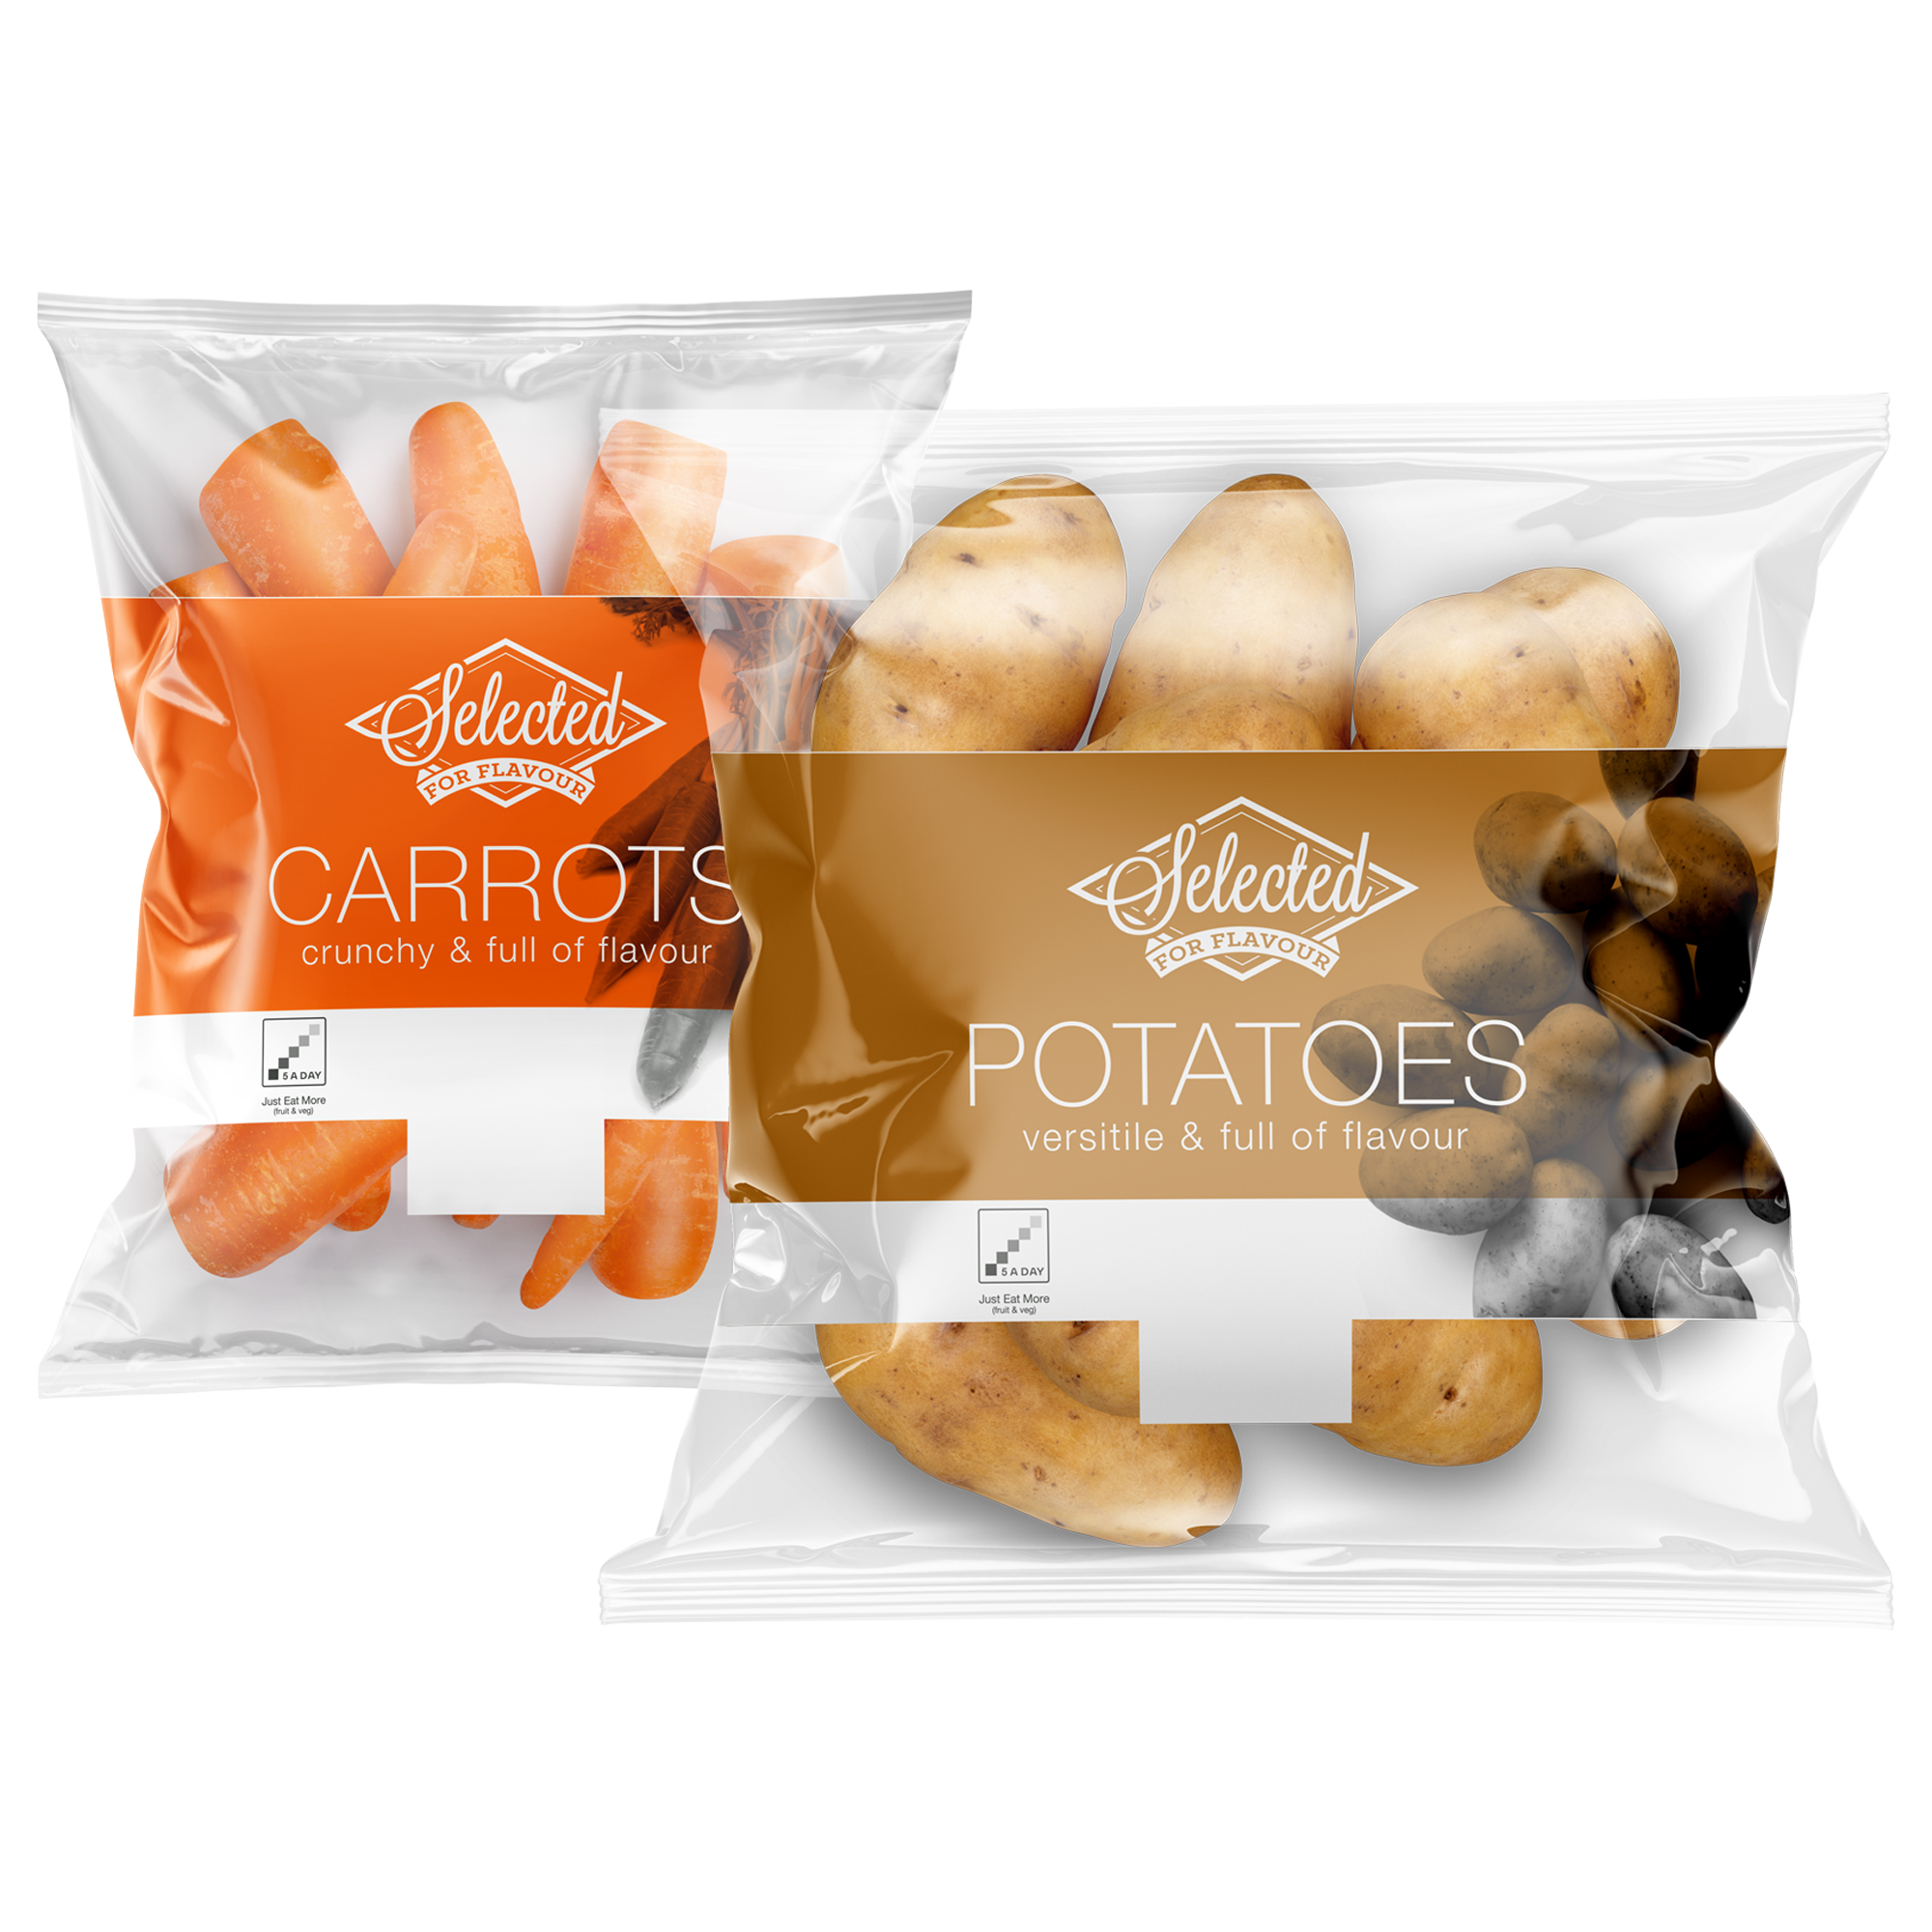 PlastoSac Selected Carrots and Potatoes VFFS